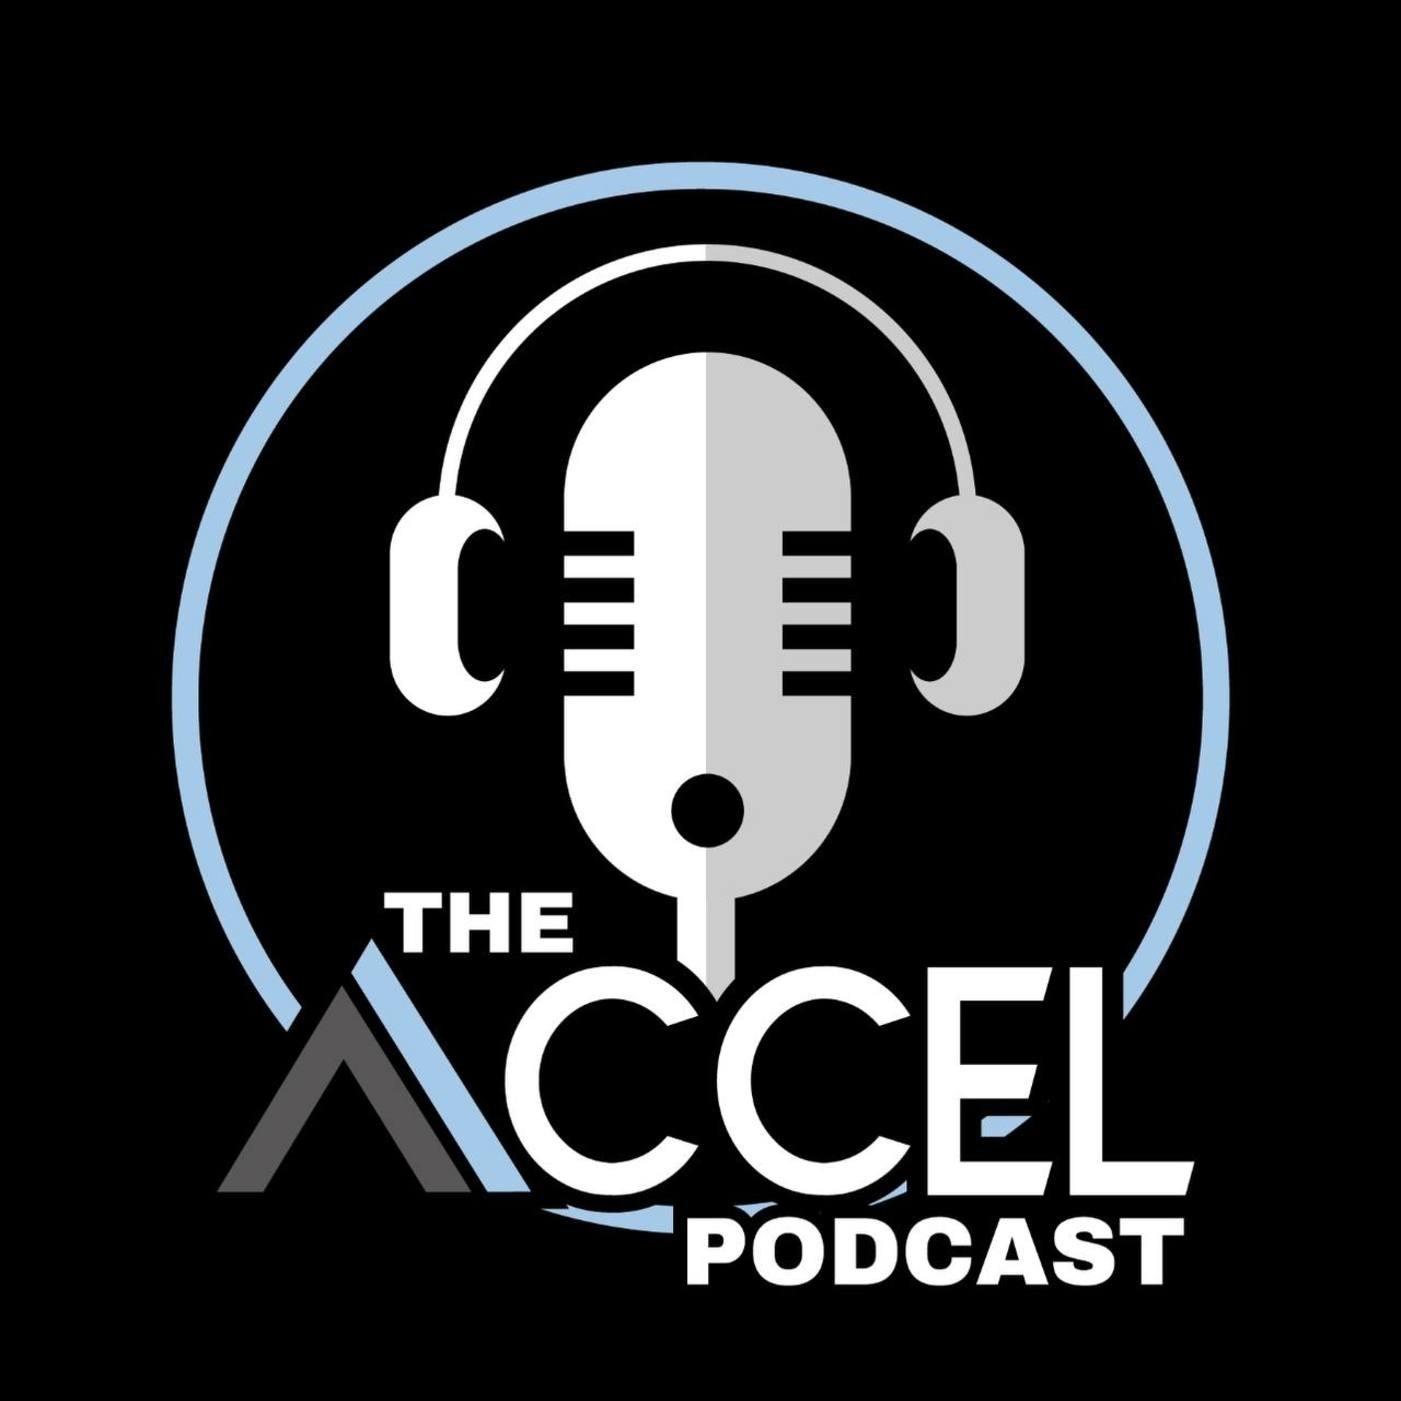 The ACCEL Podcast